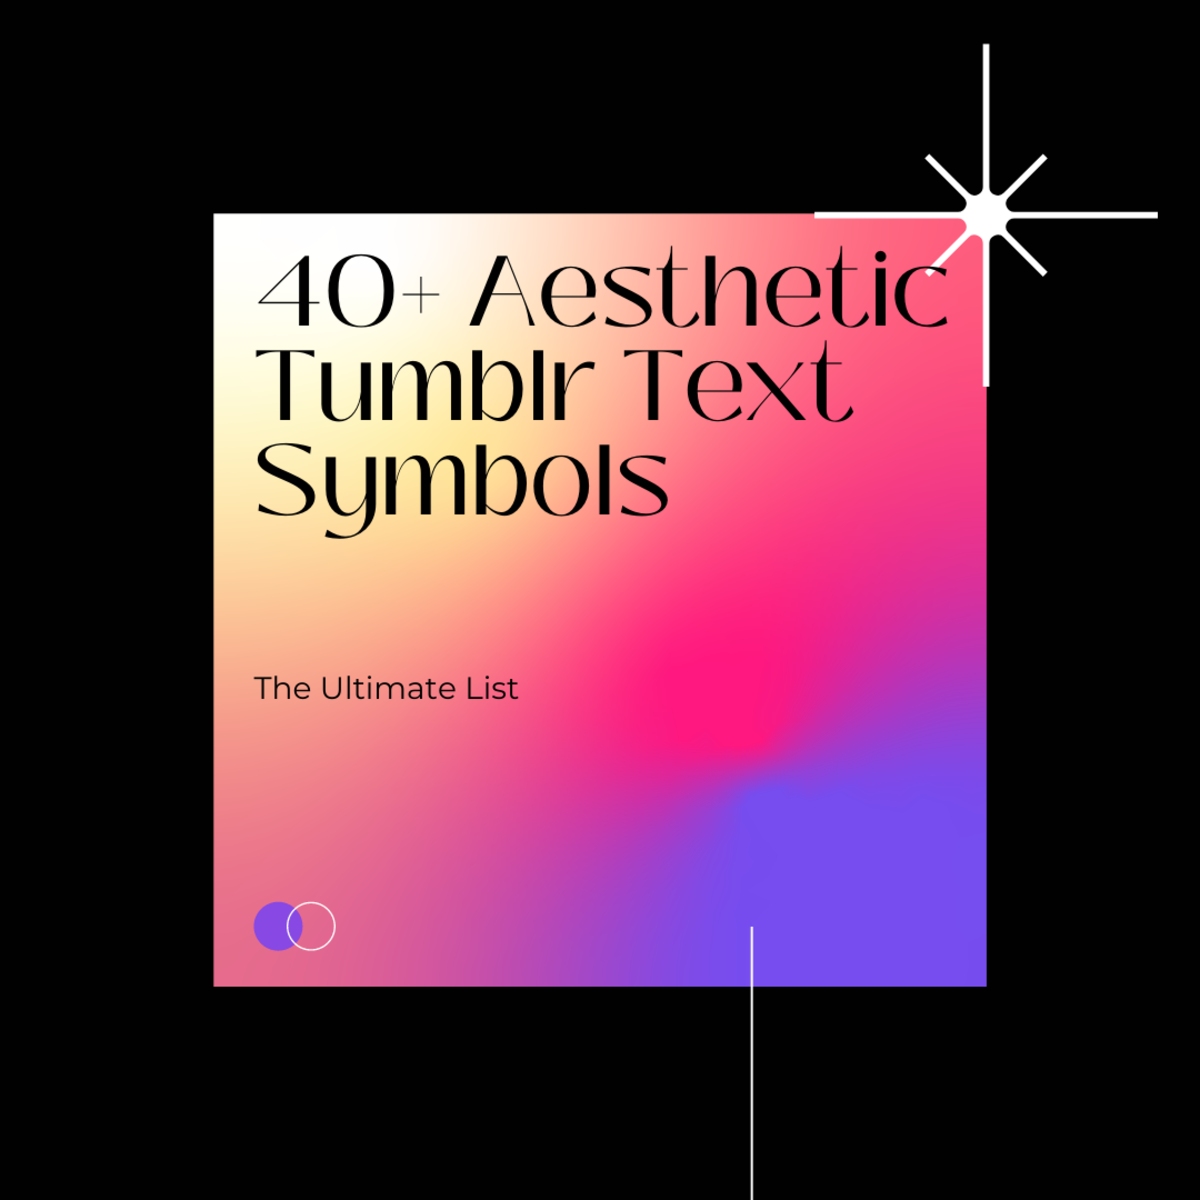 Discover over 40 Tumblr symbols in this ultimate list!